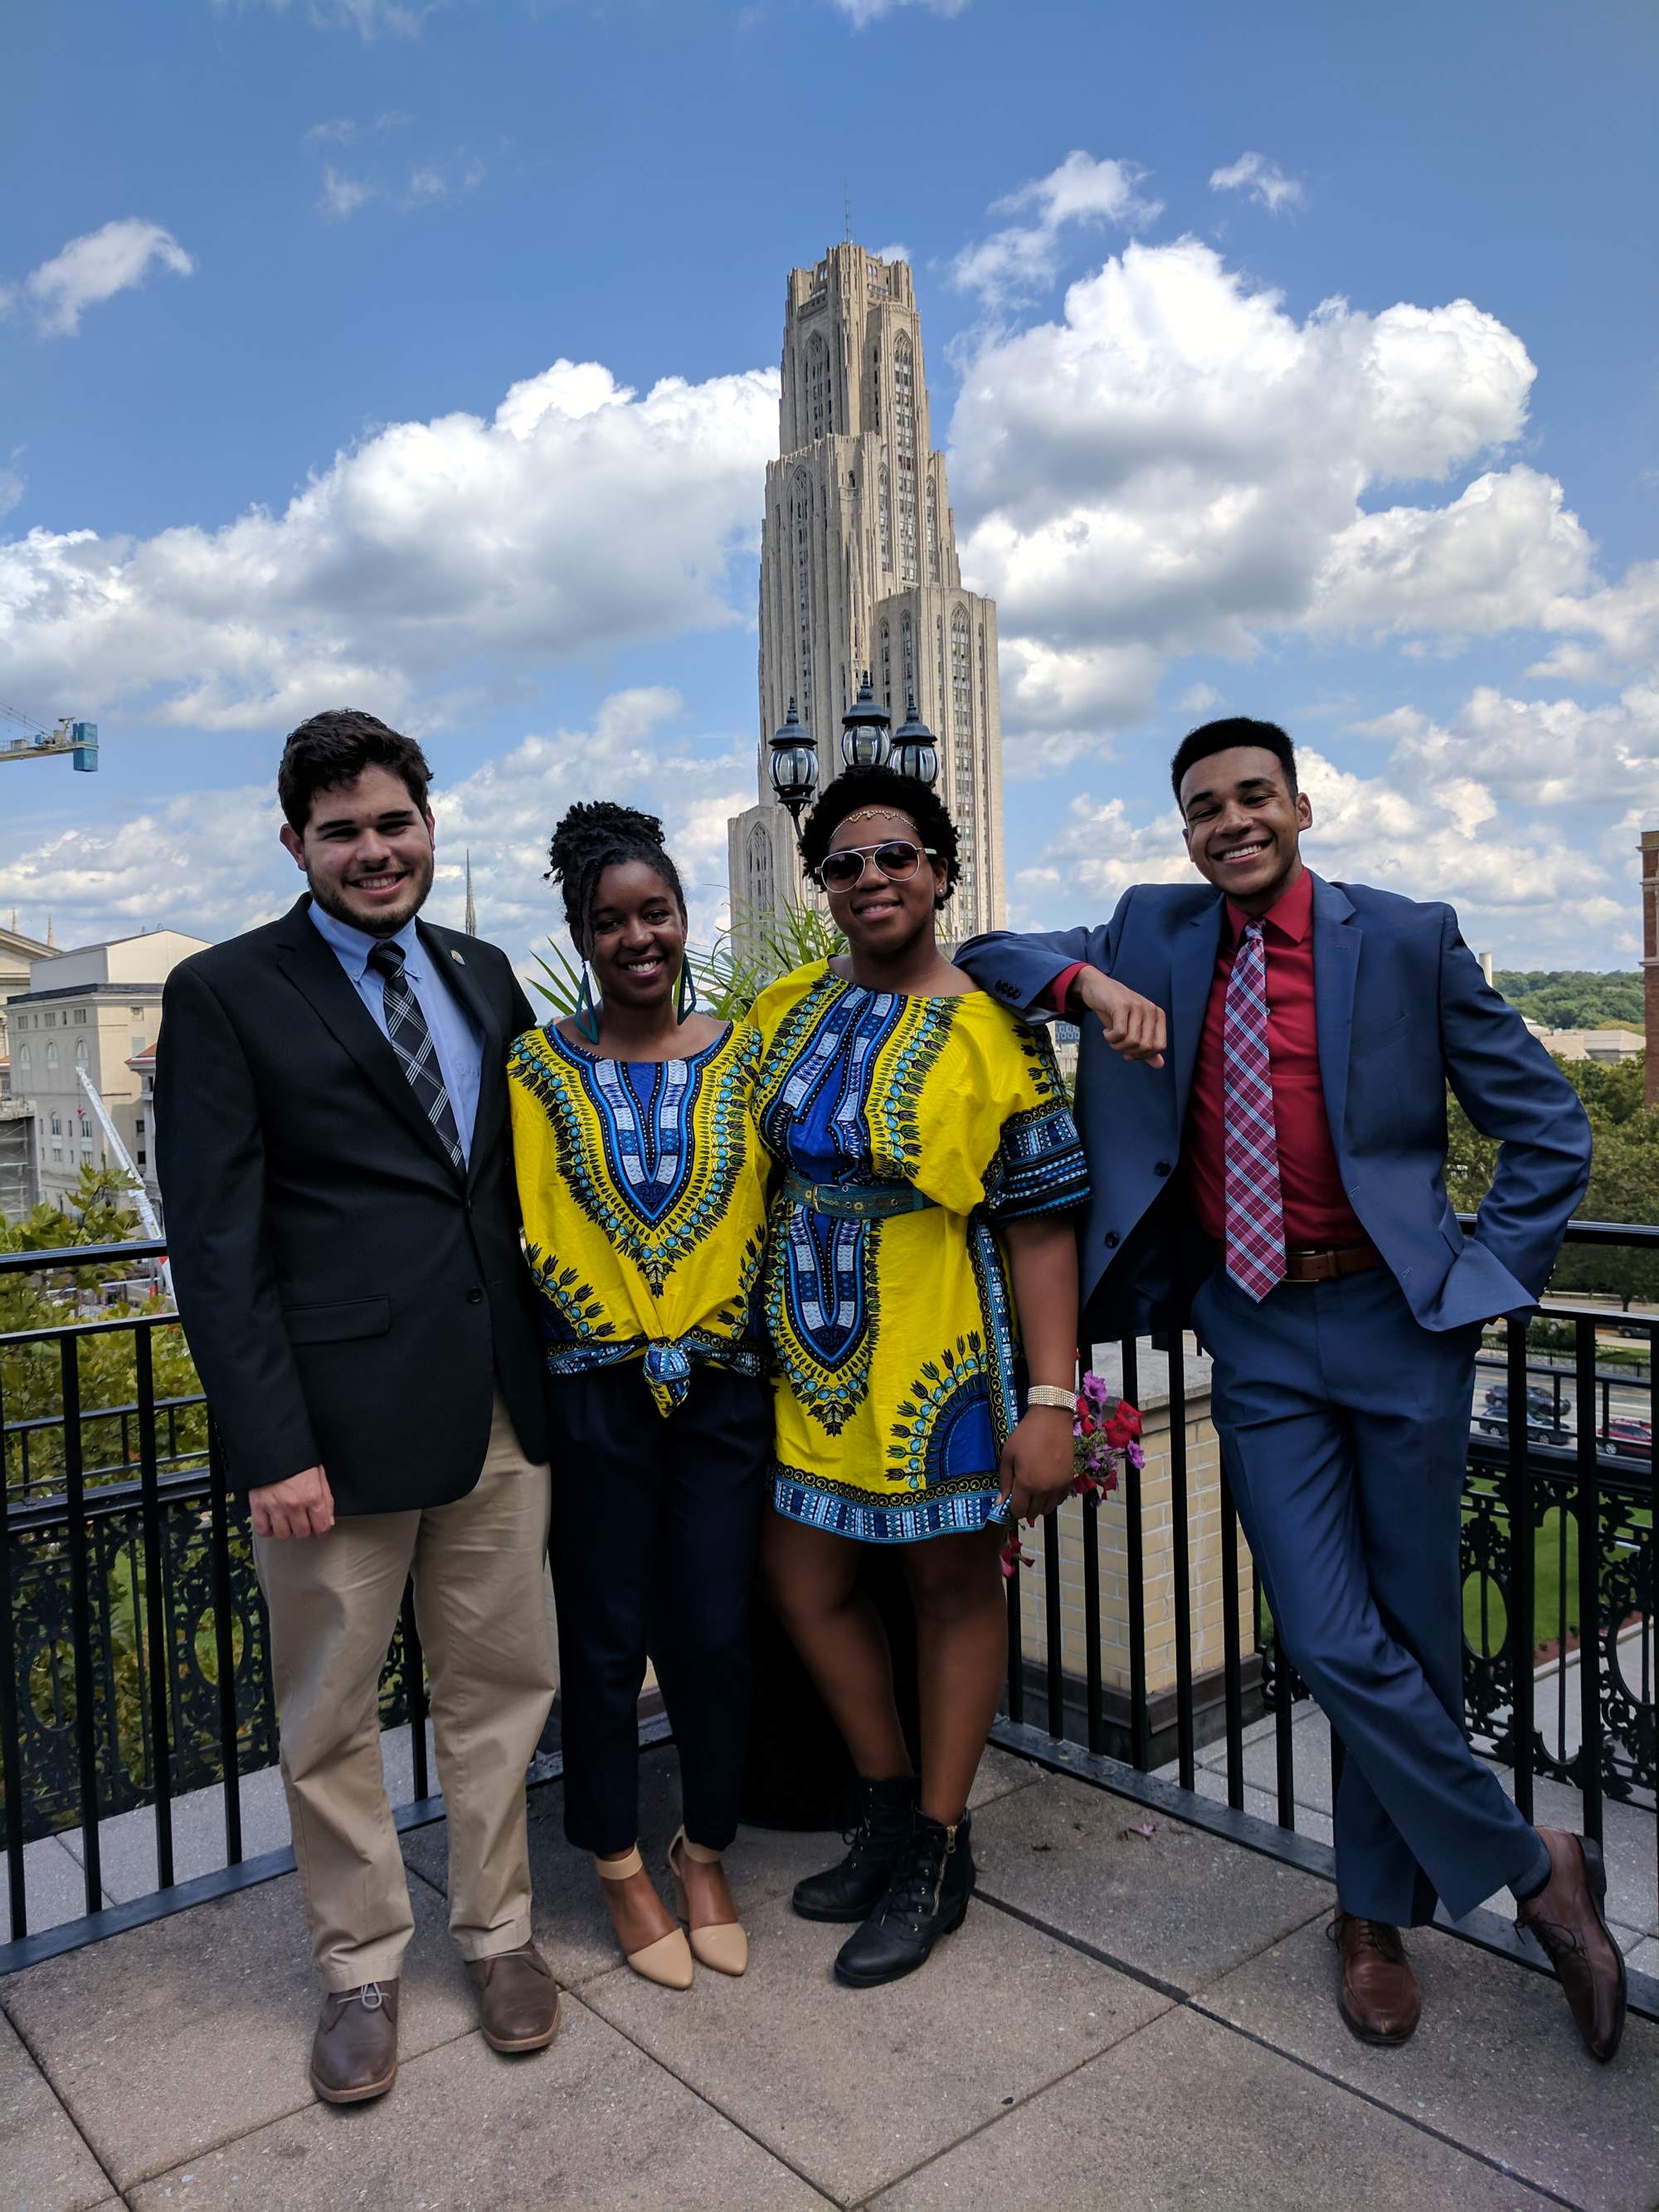 A group of students smiling in front of the cathedral of learning